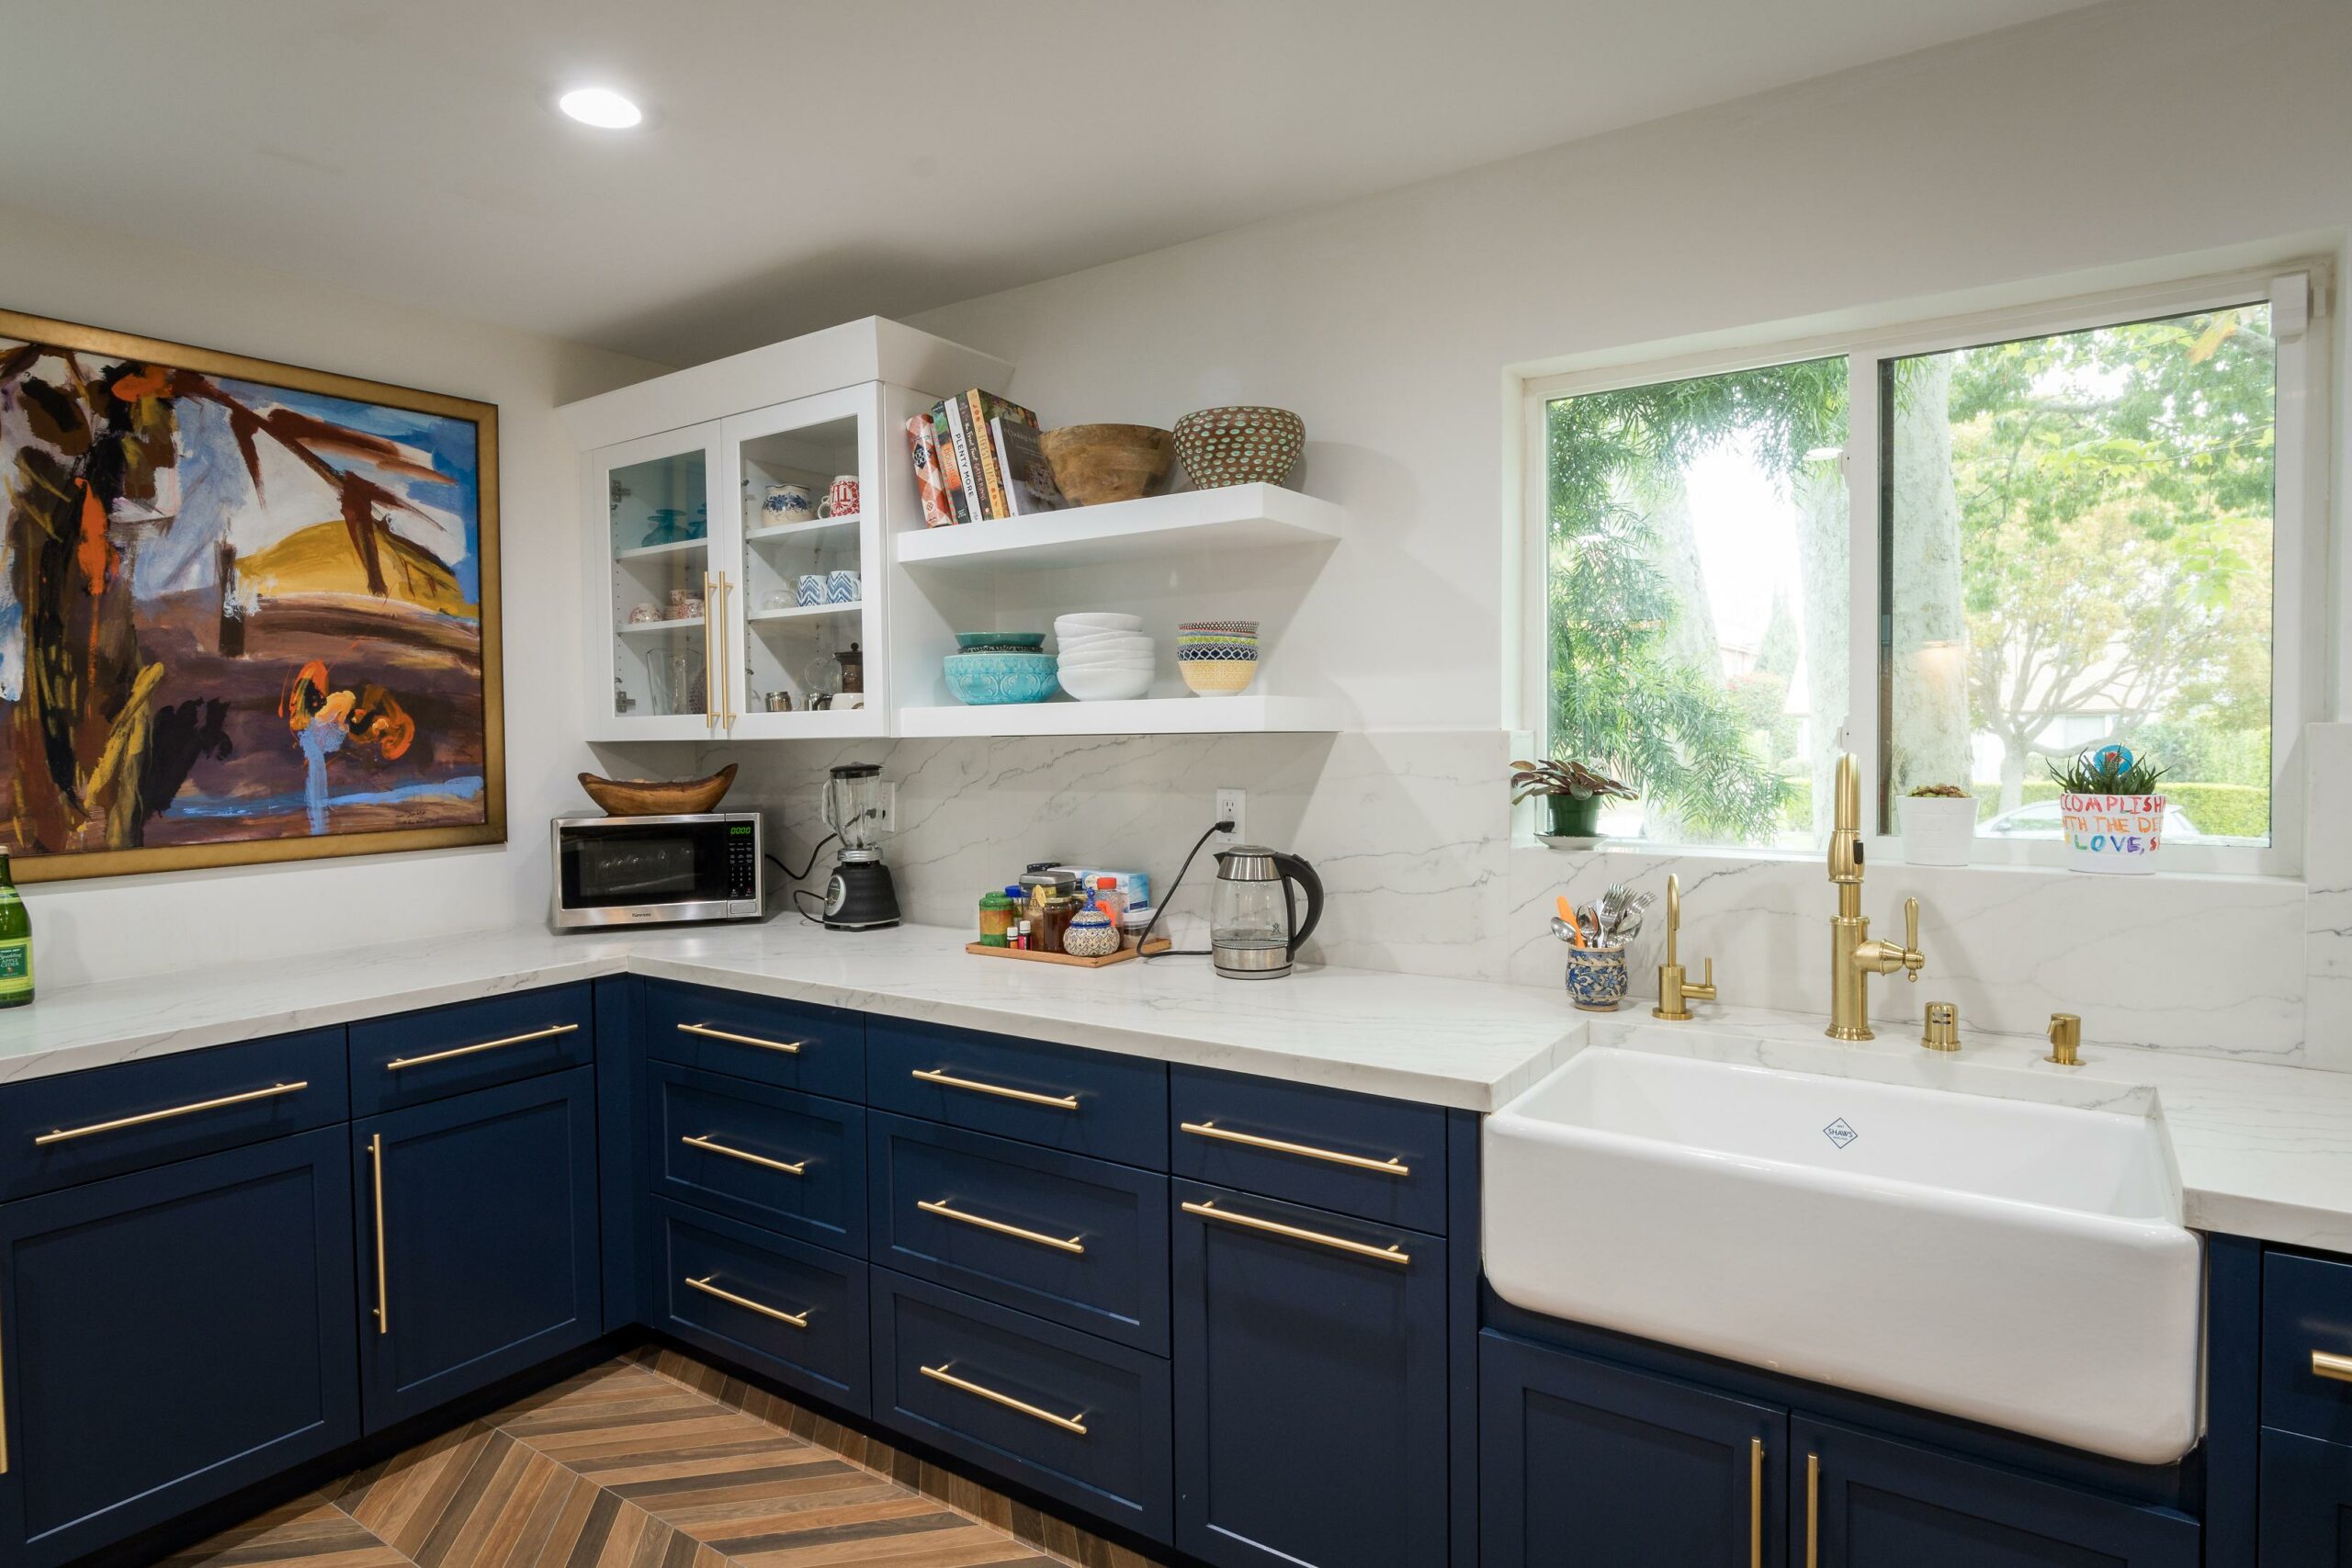 Modern kitchen with blue cabinets and marble countertops.